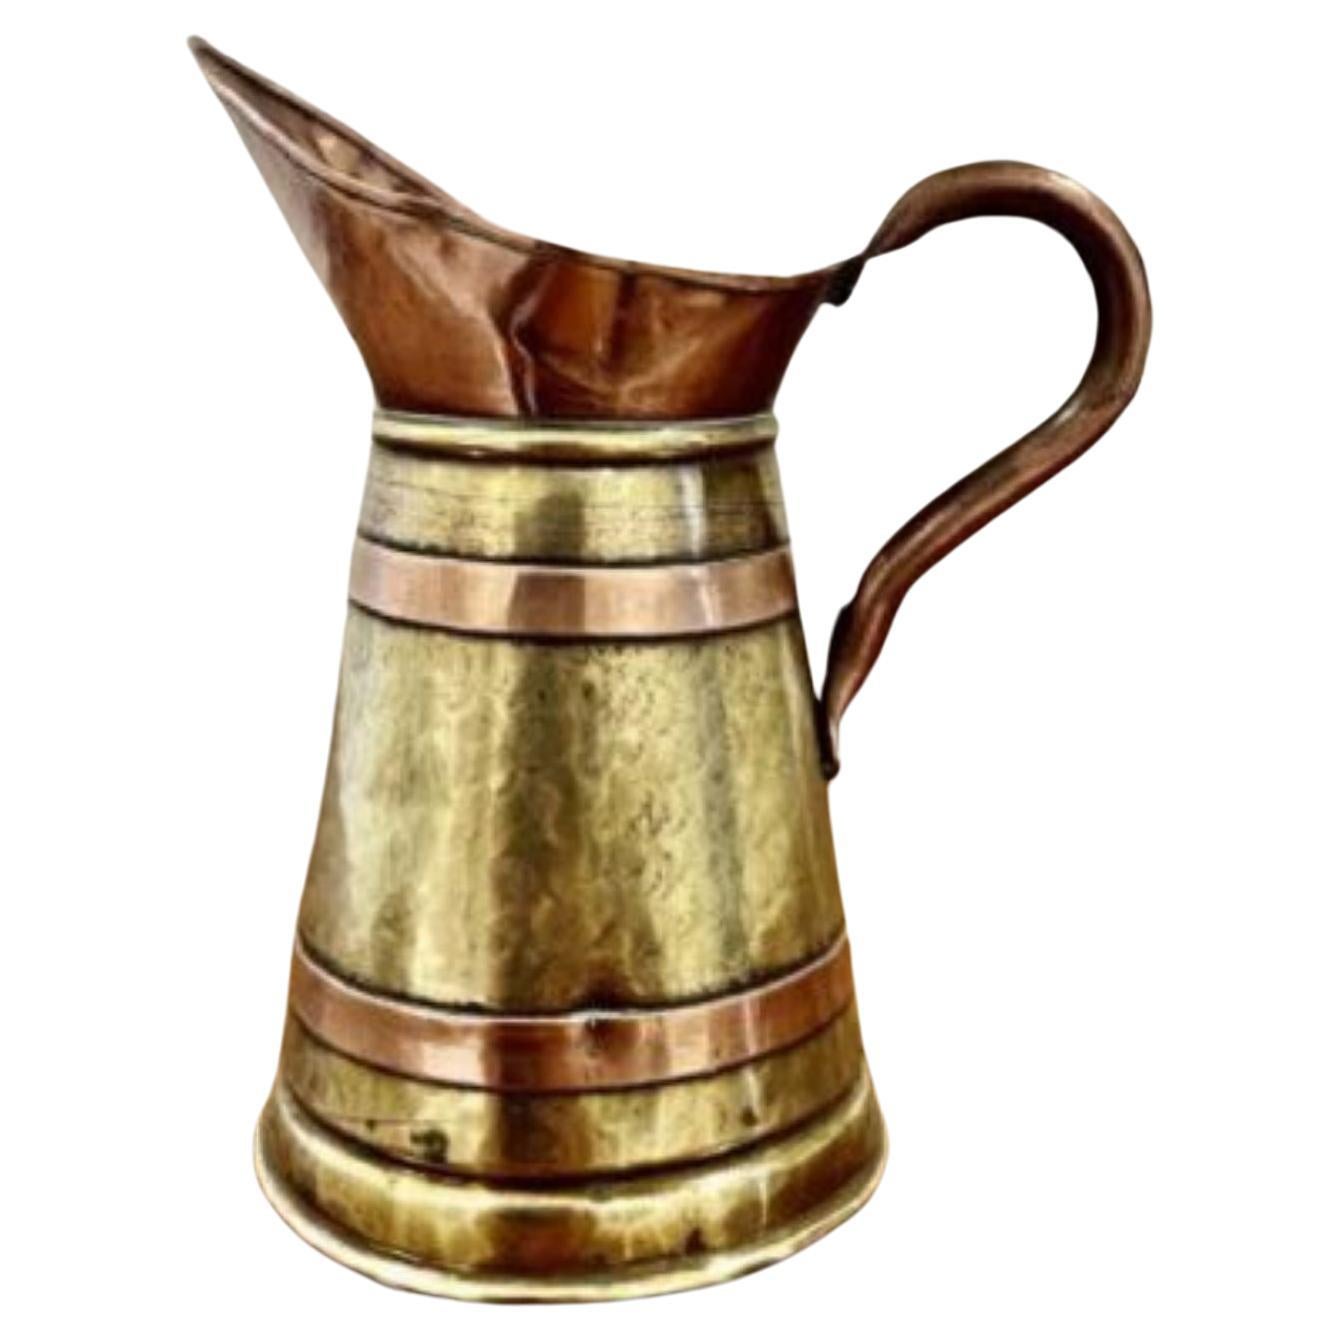 Antique Edwardian quality brass and copper jug